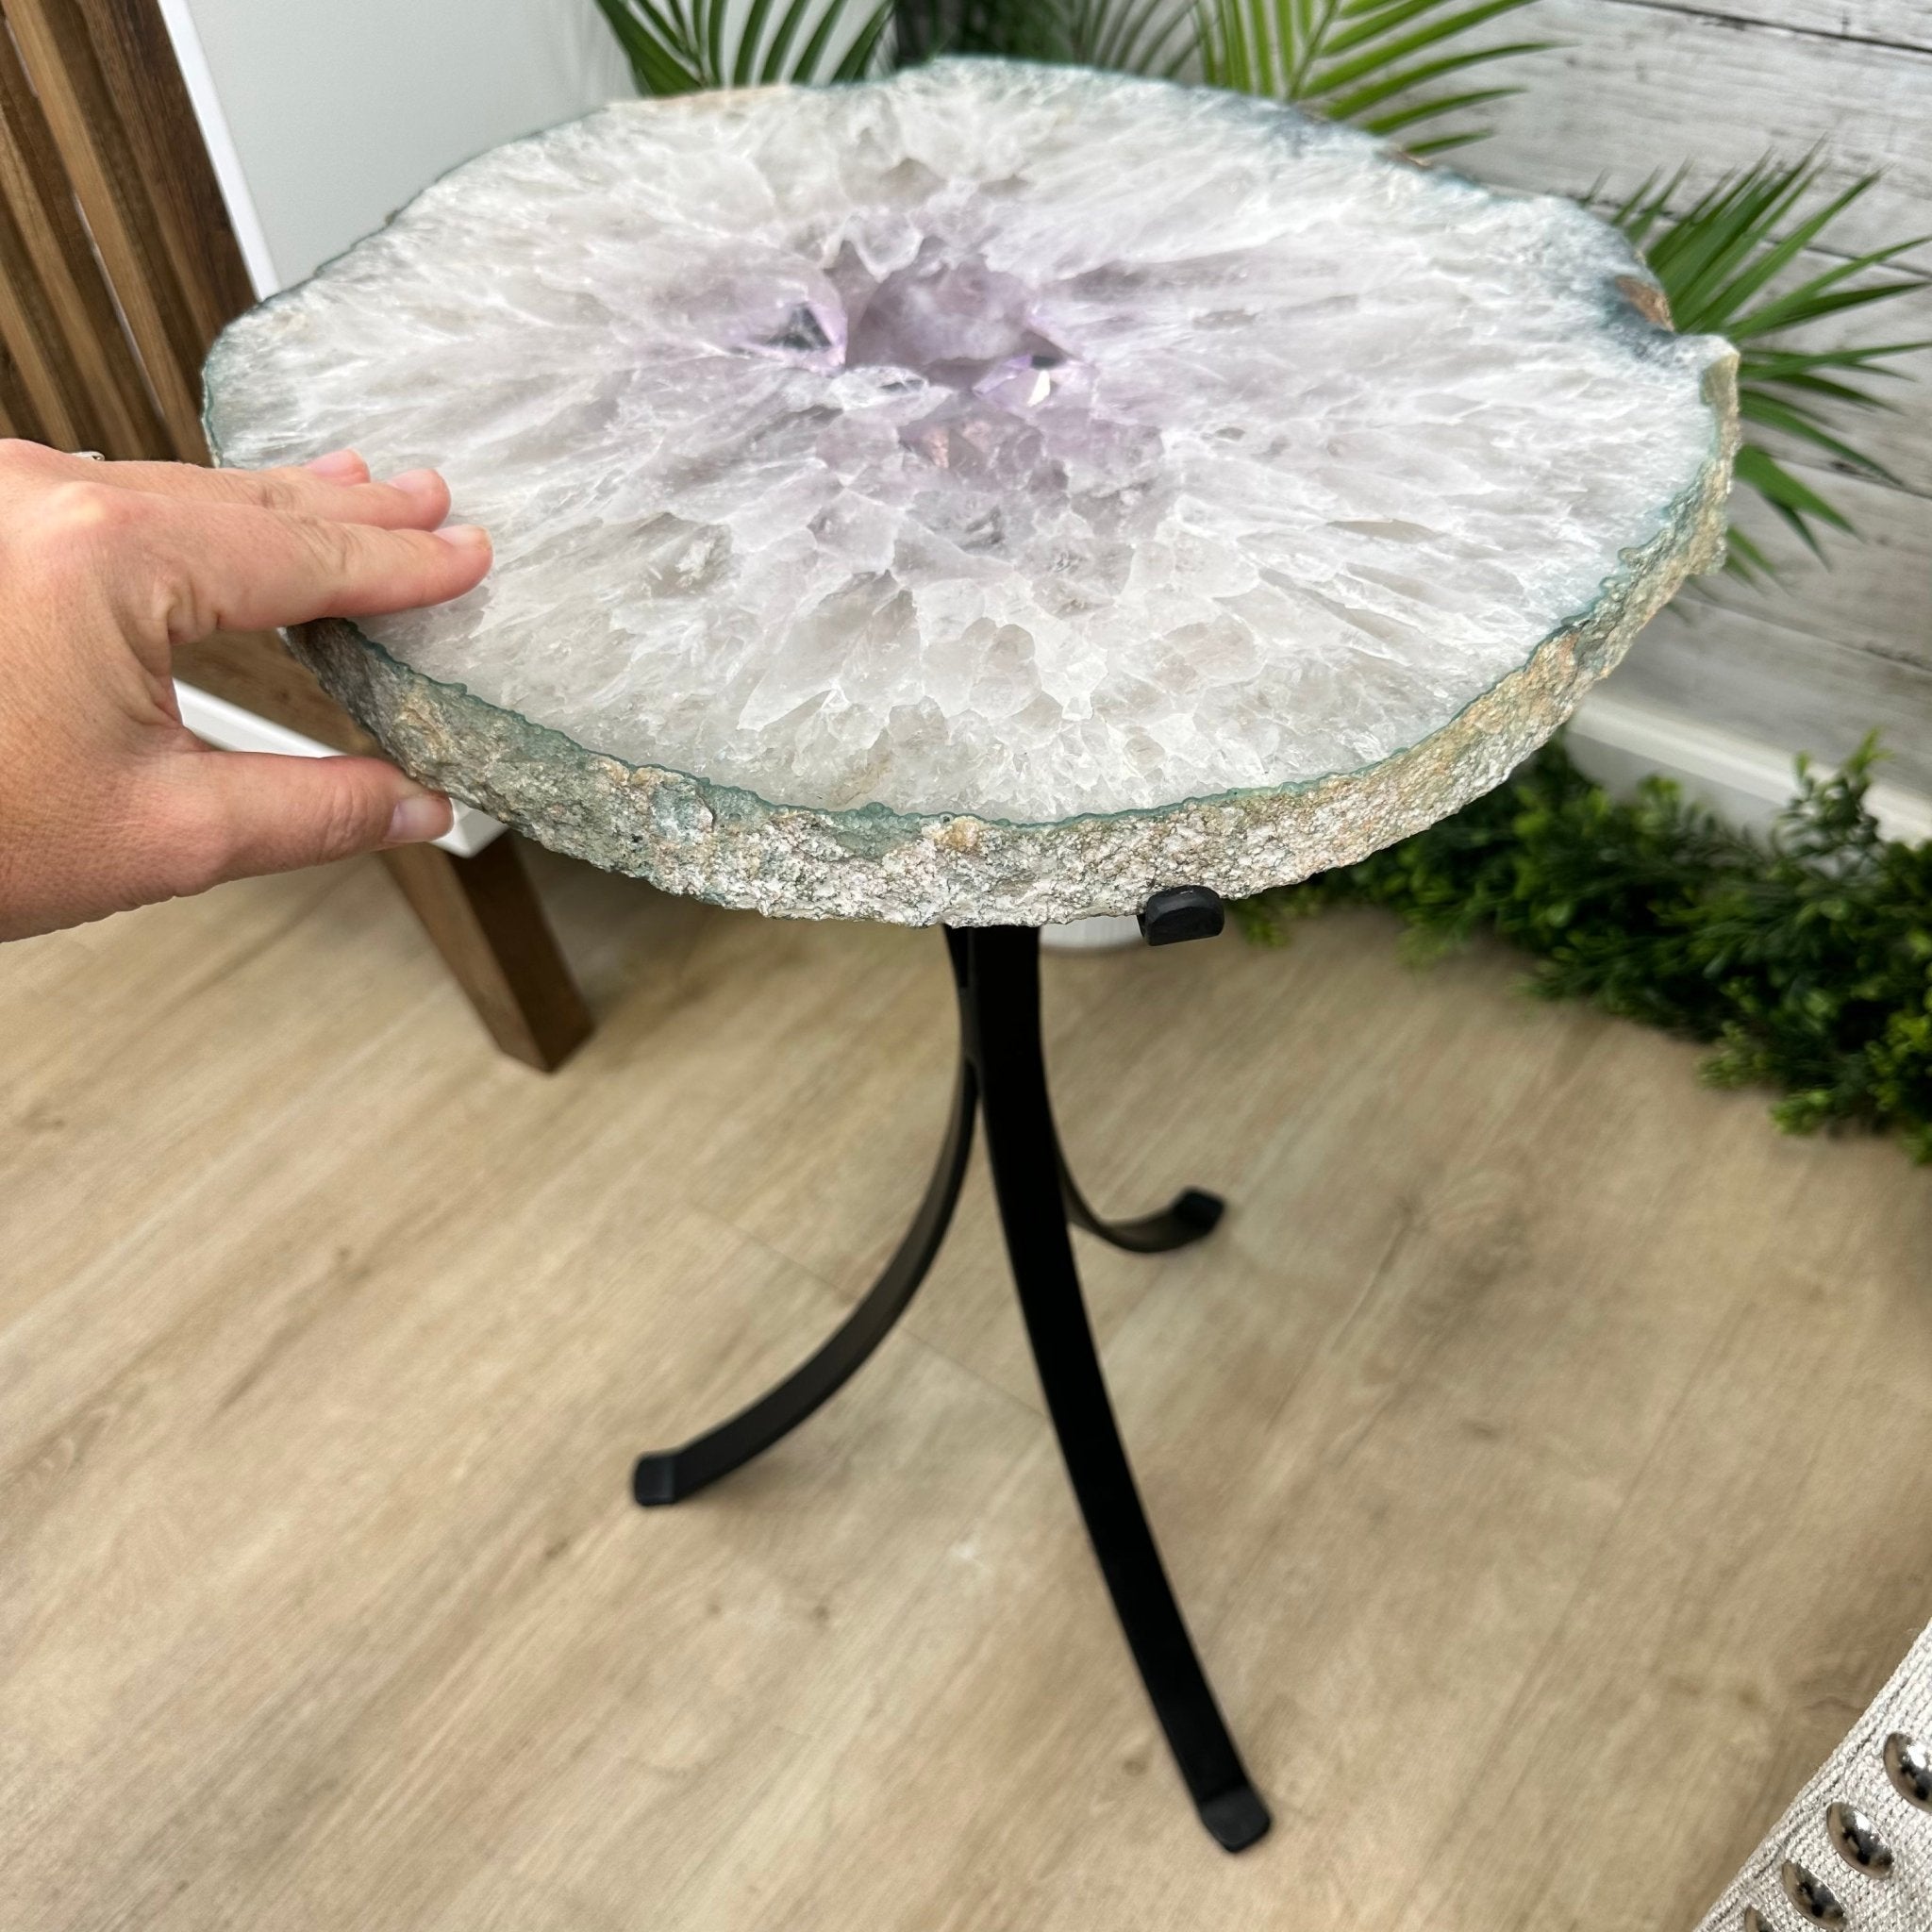 Natural Brazilian Agate Side Table on a black metal base, 22" tall #1306-0042 by Brazil Gems - Brazil GemsBrazil GemsNatural Brazilian Agate Side Table on a black metal base, 22" tall #1306-0042 by Brazil GemsTables: Side1306-0042